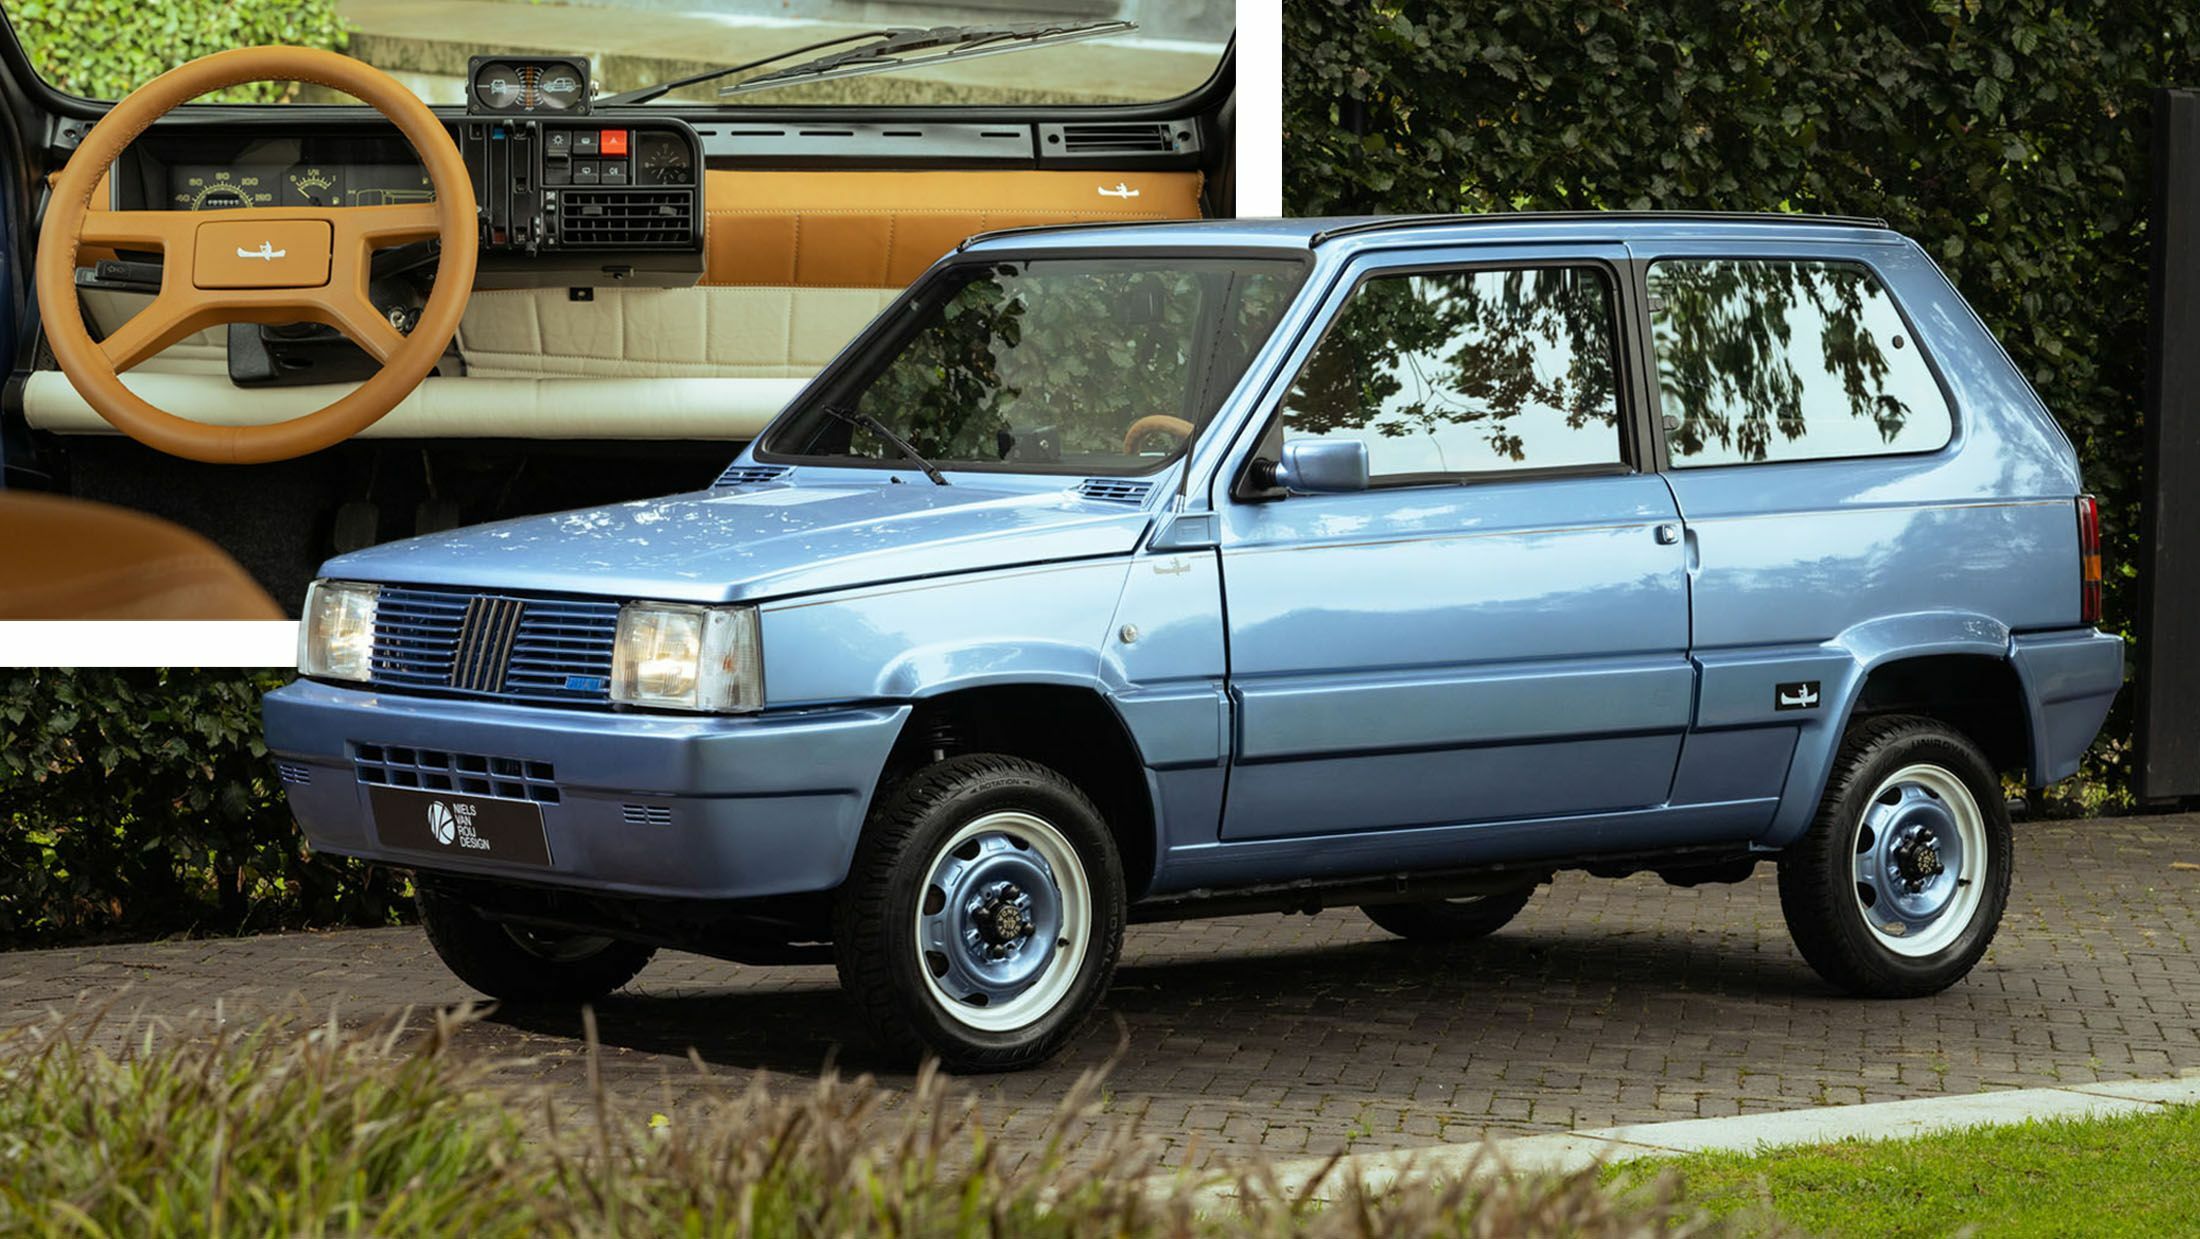 Fiat Panda 4×4 Piccolo Lusso Is A €30k One-Off Restomod With A  Mediterranean Flair